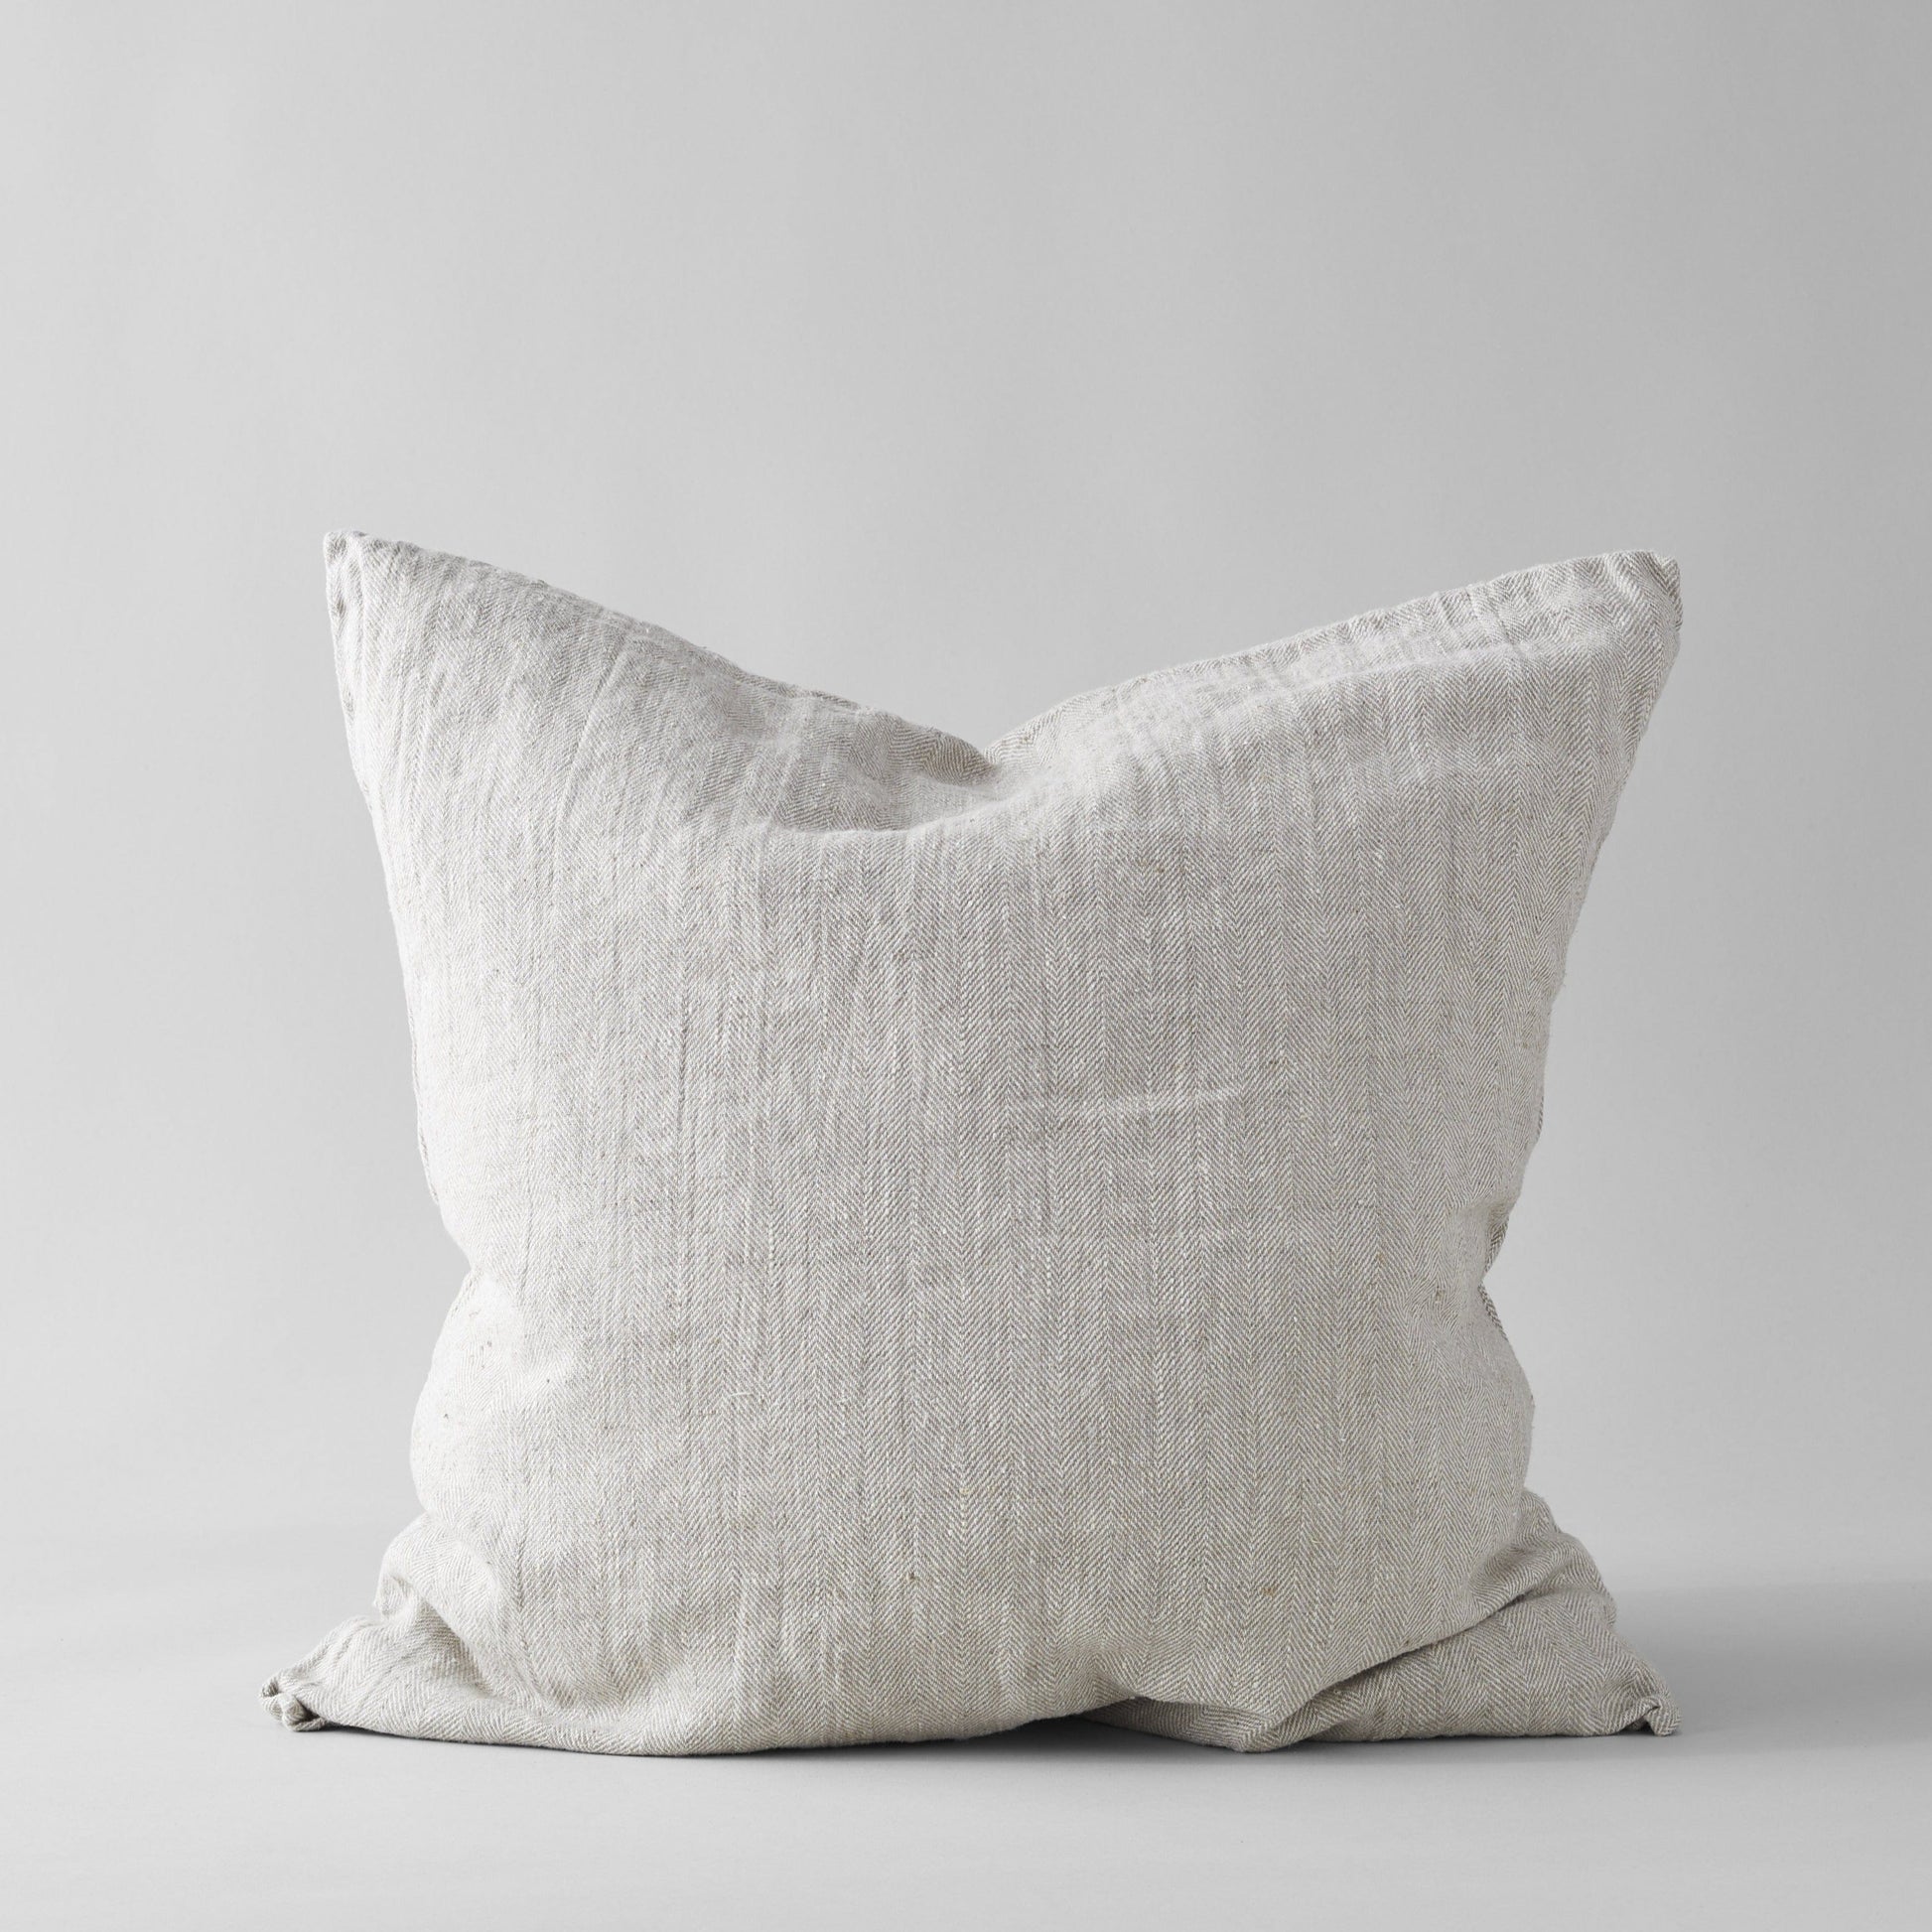 Bloomist Pillows Cover Only Herringbone Linen Pillow in Natural, 24x24